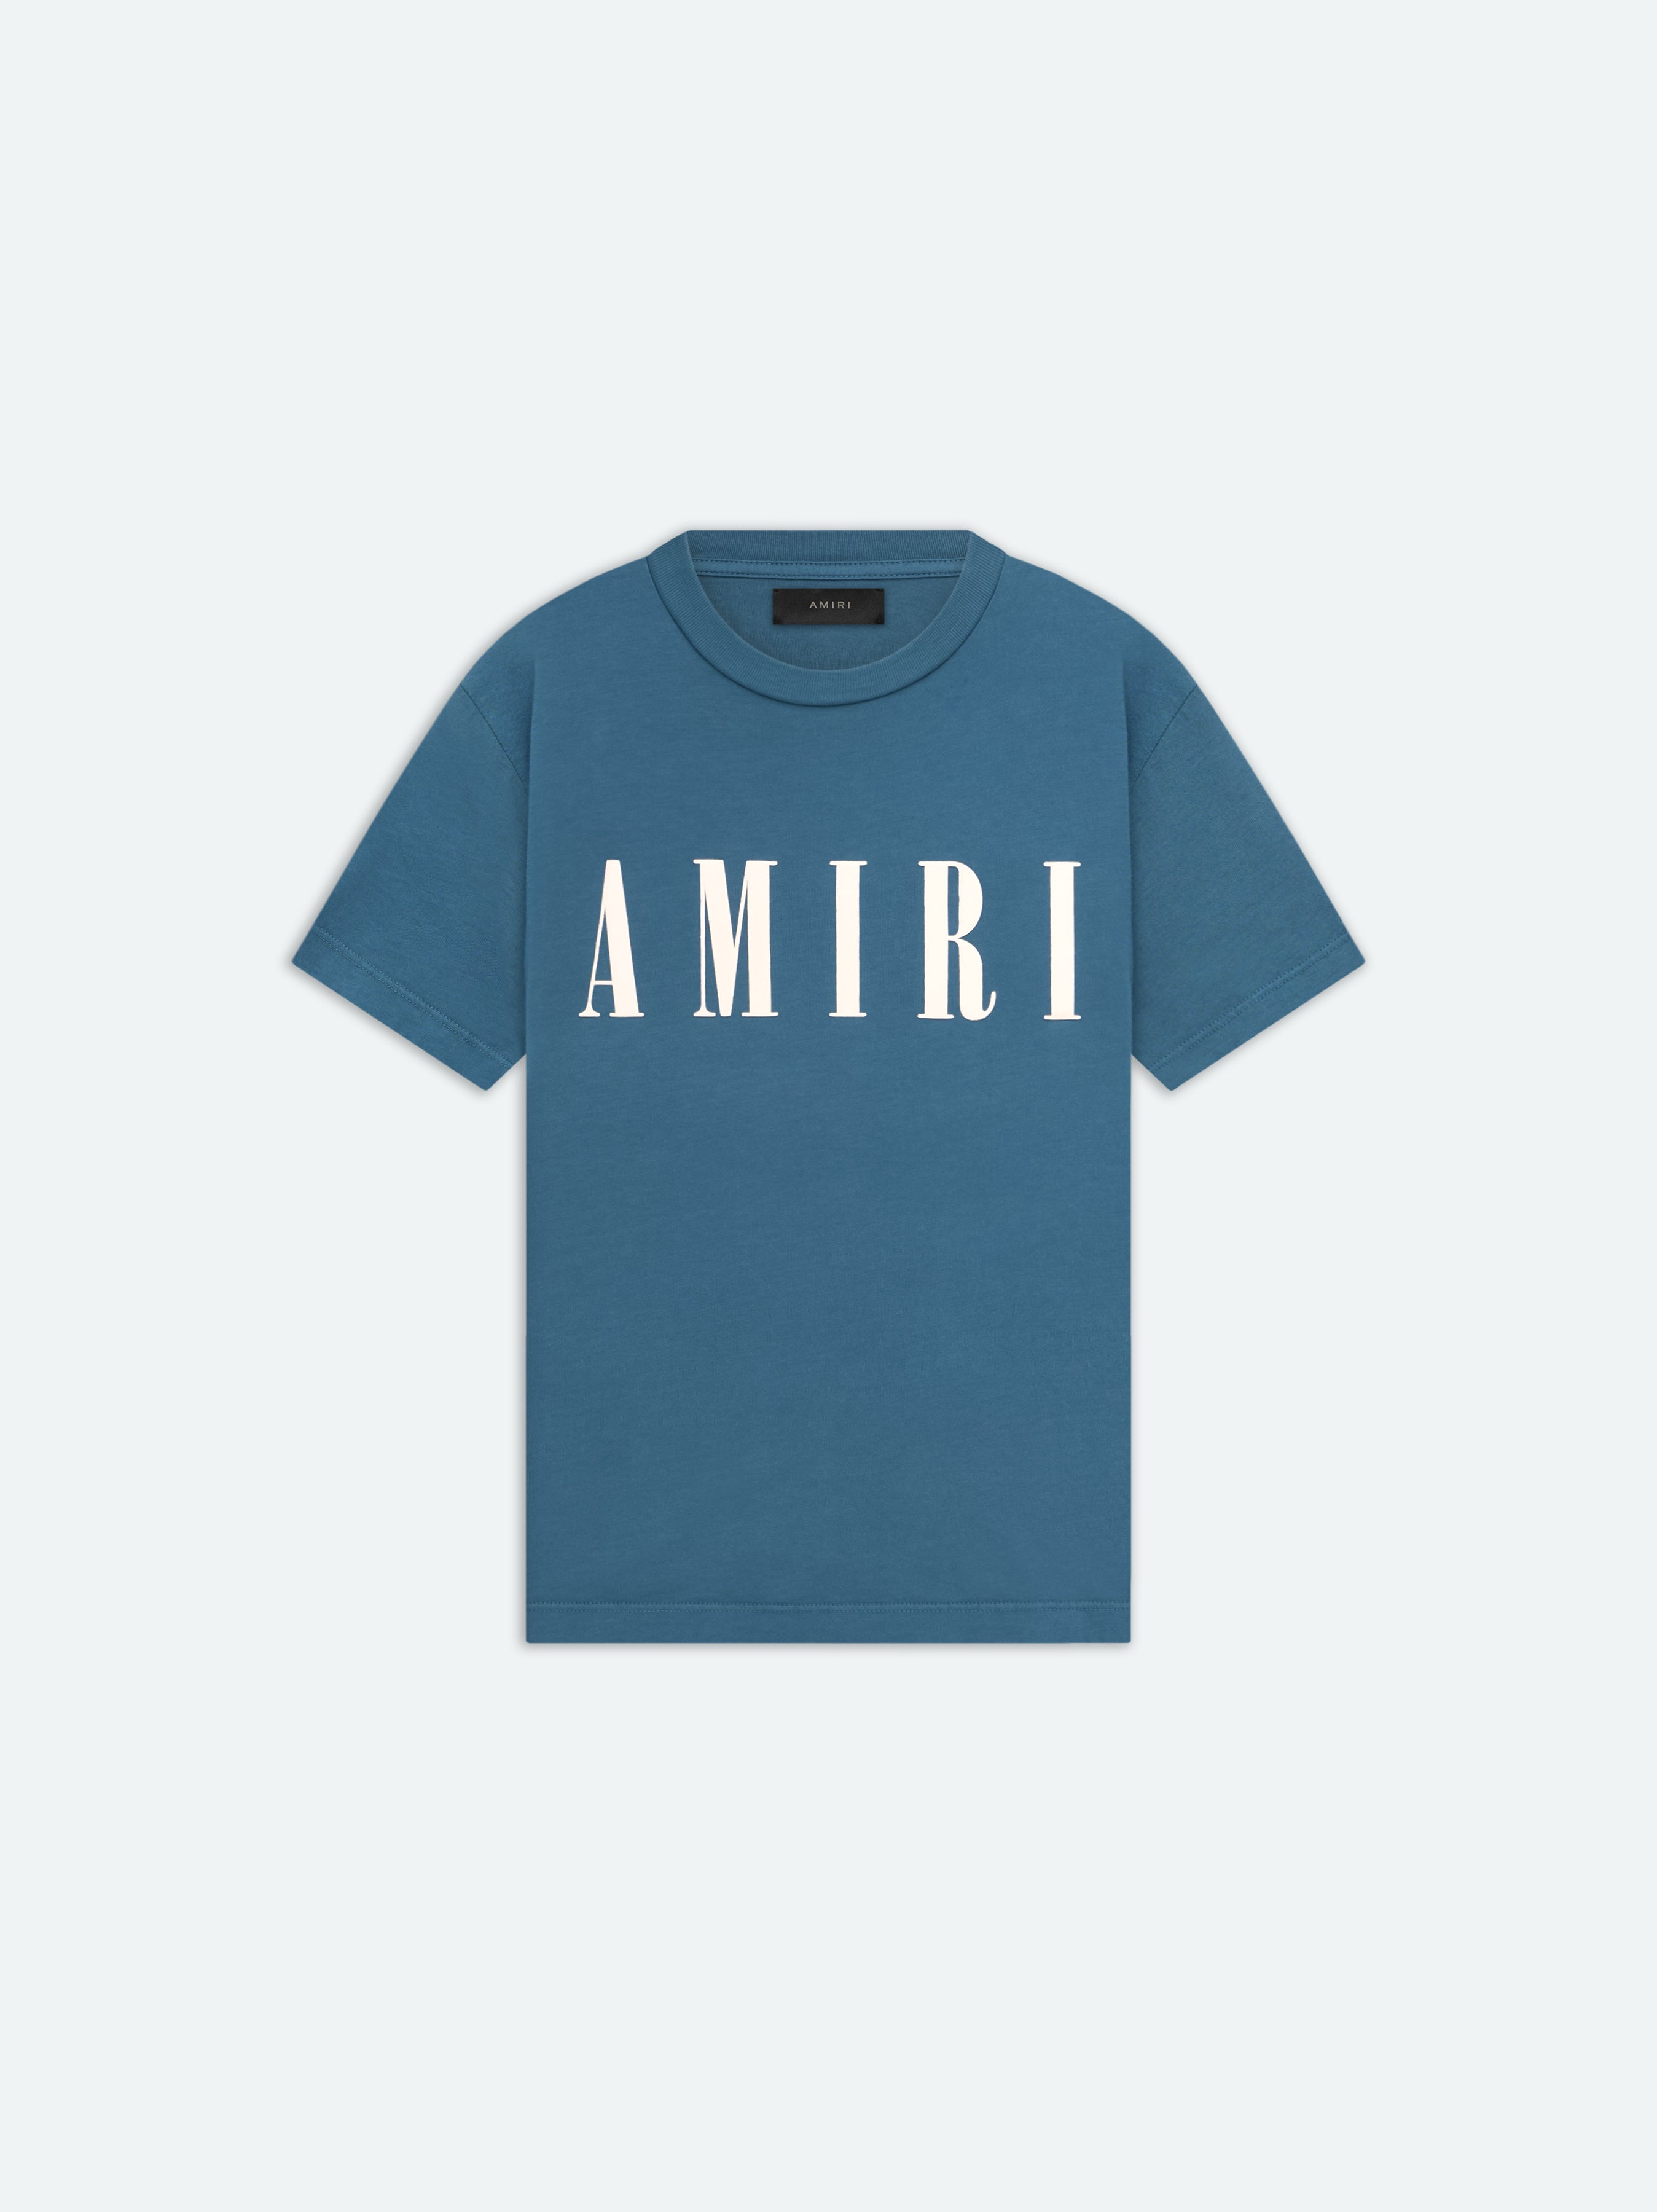 Product WOMEN - CORE LOGO SLIM FIT TEE - Blue featured image